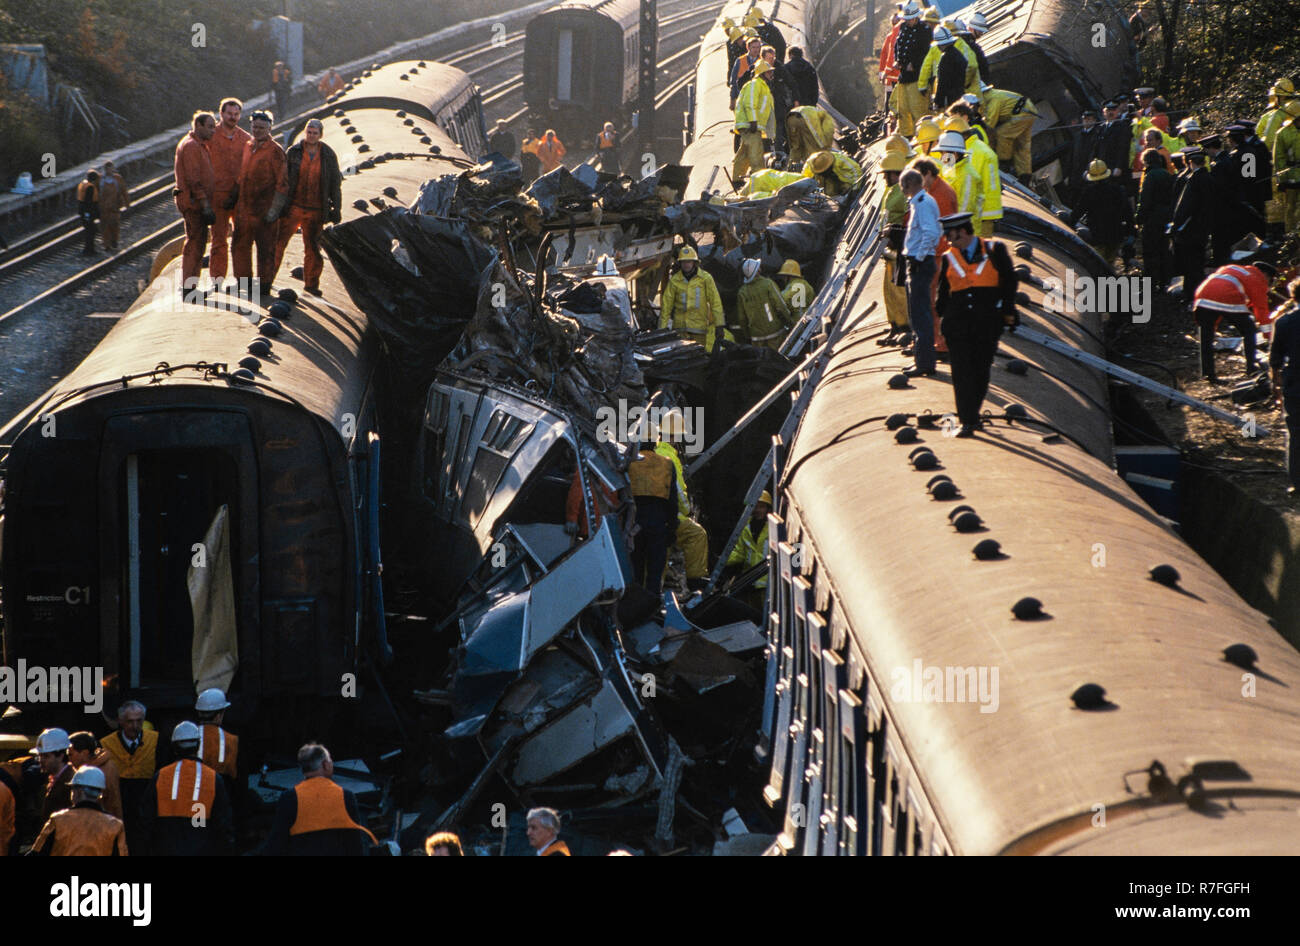 CLAPHAM JUNCTION, LONDON - DECEMBER 12, 1988: The Clapham Junction Train Crash. On the morning of December 12, 1988, a crowded passenger train crashed into the rear of another train that had stopped at a signal, just south of Clapham Junction railway station in London, and subsequently sideswiped an empty train travelling in the opposite direction. A total of 35 people were killed in the collision, while 484 were injured. Photo: Â© David Levenson/Alamy Stock Photo